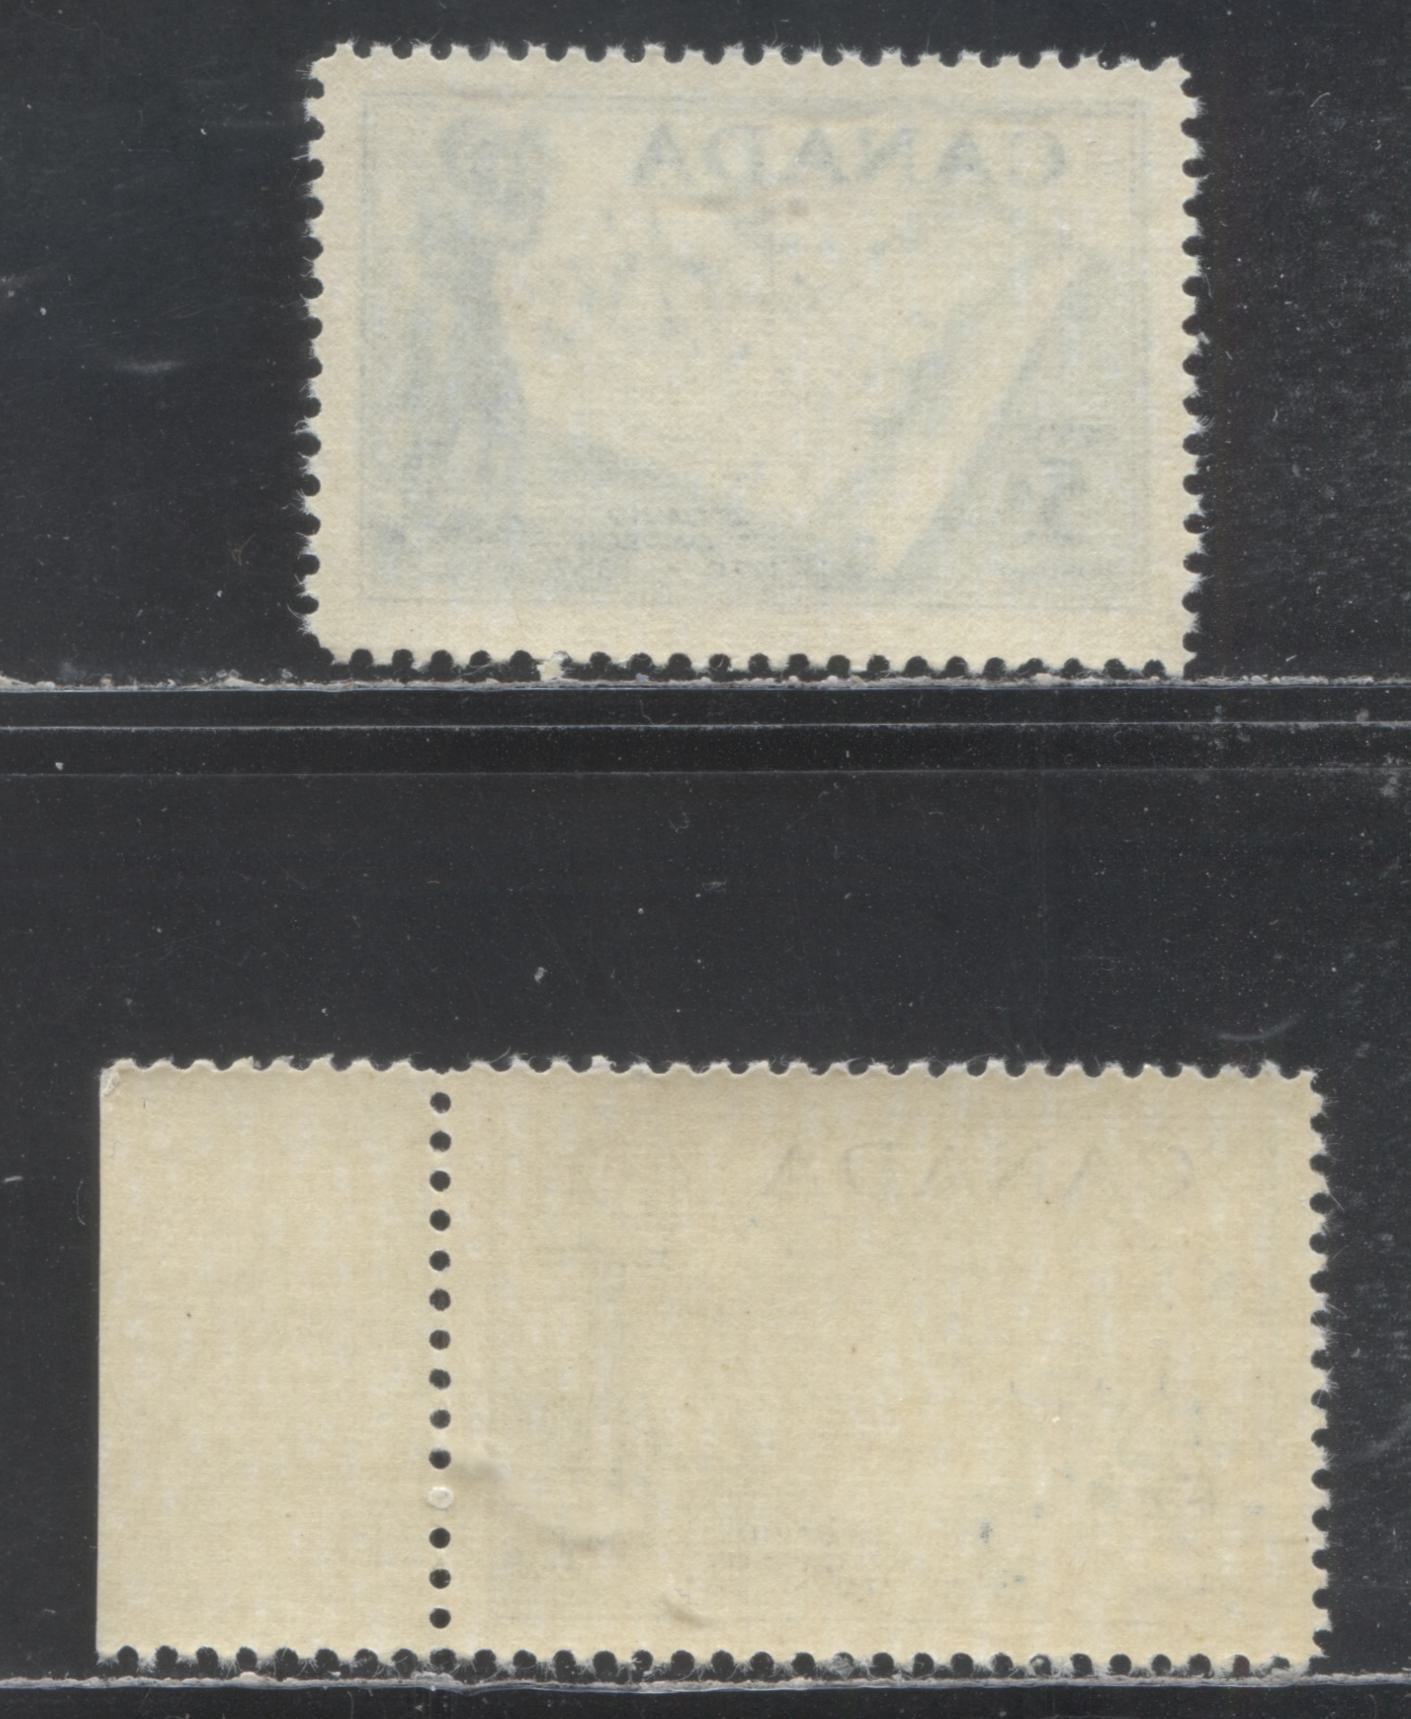 Lot 415 Canada #370var 5c Aniline Ultramarine Davit Thompson, 1957 David Thompson Issue, 2 VFNH Singles,Smooth Paper, Ribbed On Back, Streaky Cream Semi-Gloss Gum, Scarce And Likely Genuine, Notwithstanding Unitrade's Note